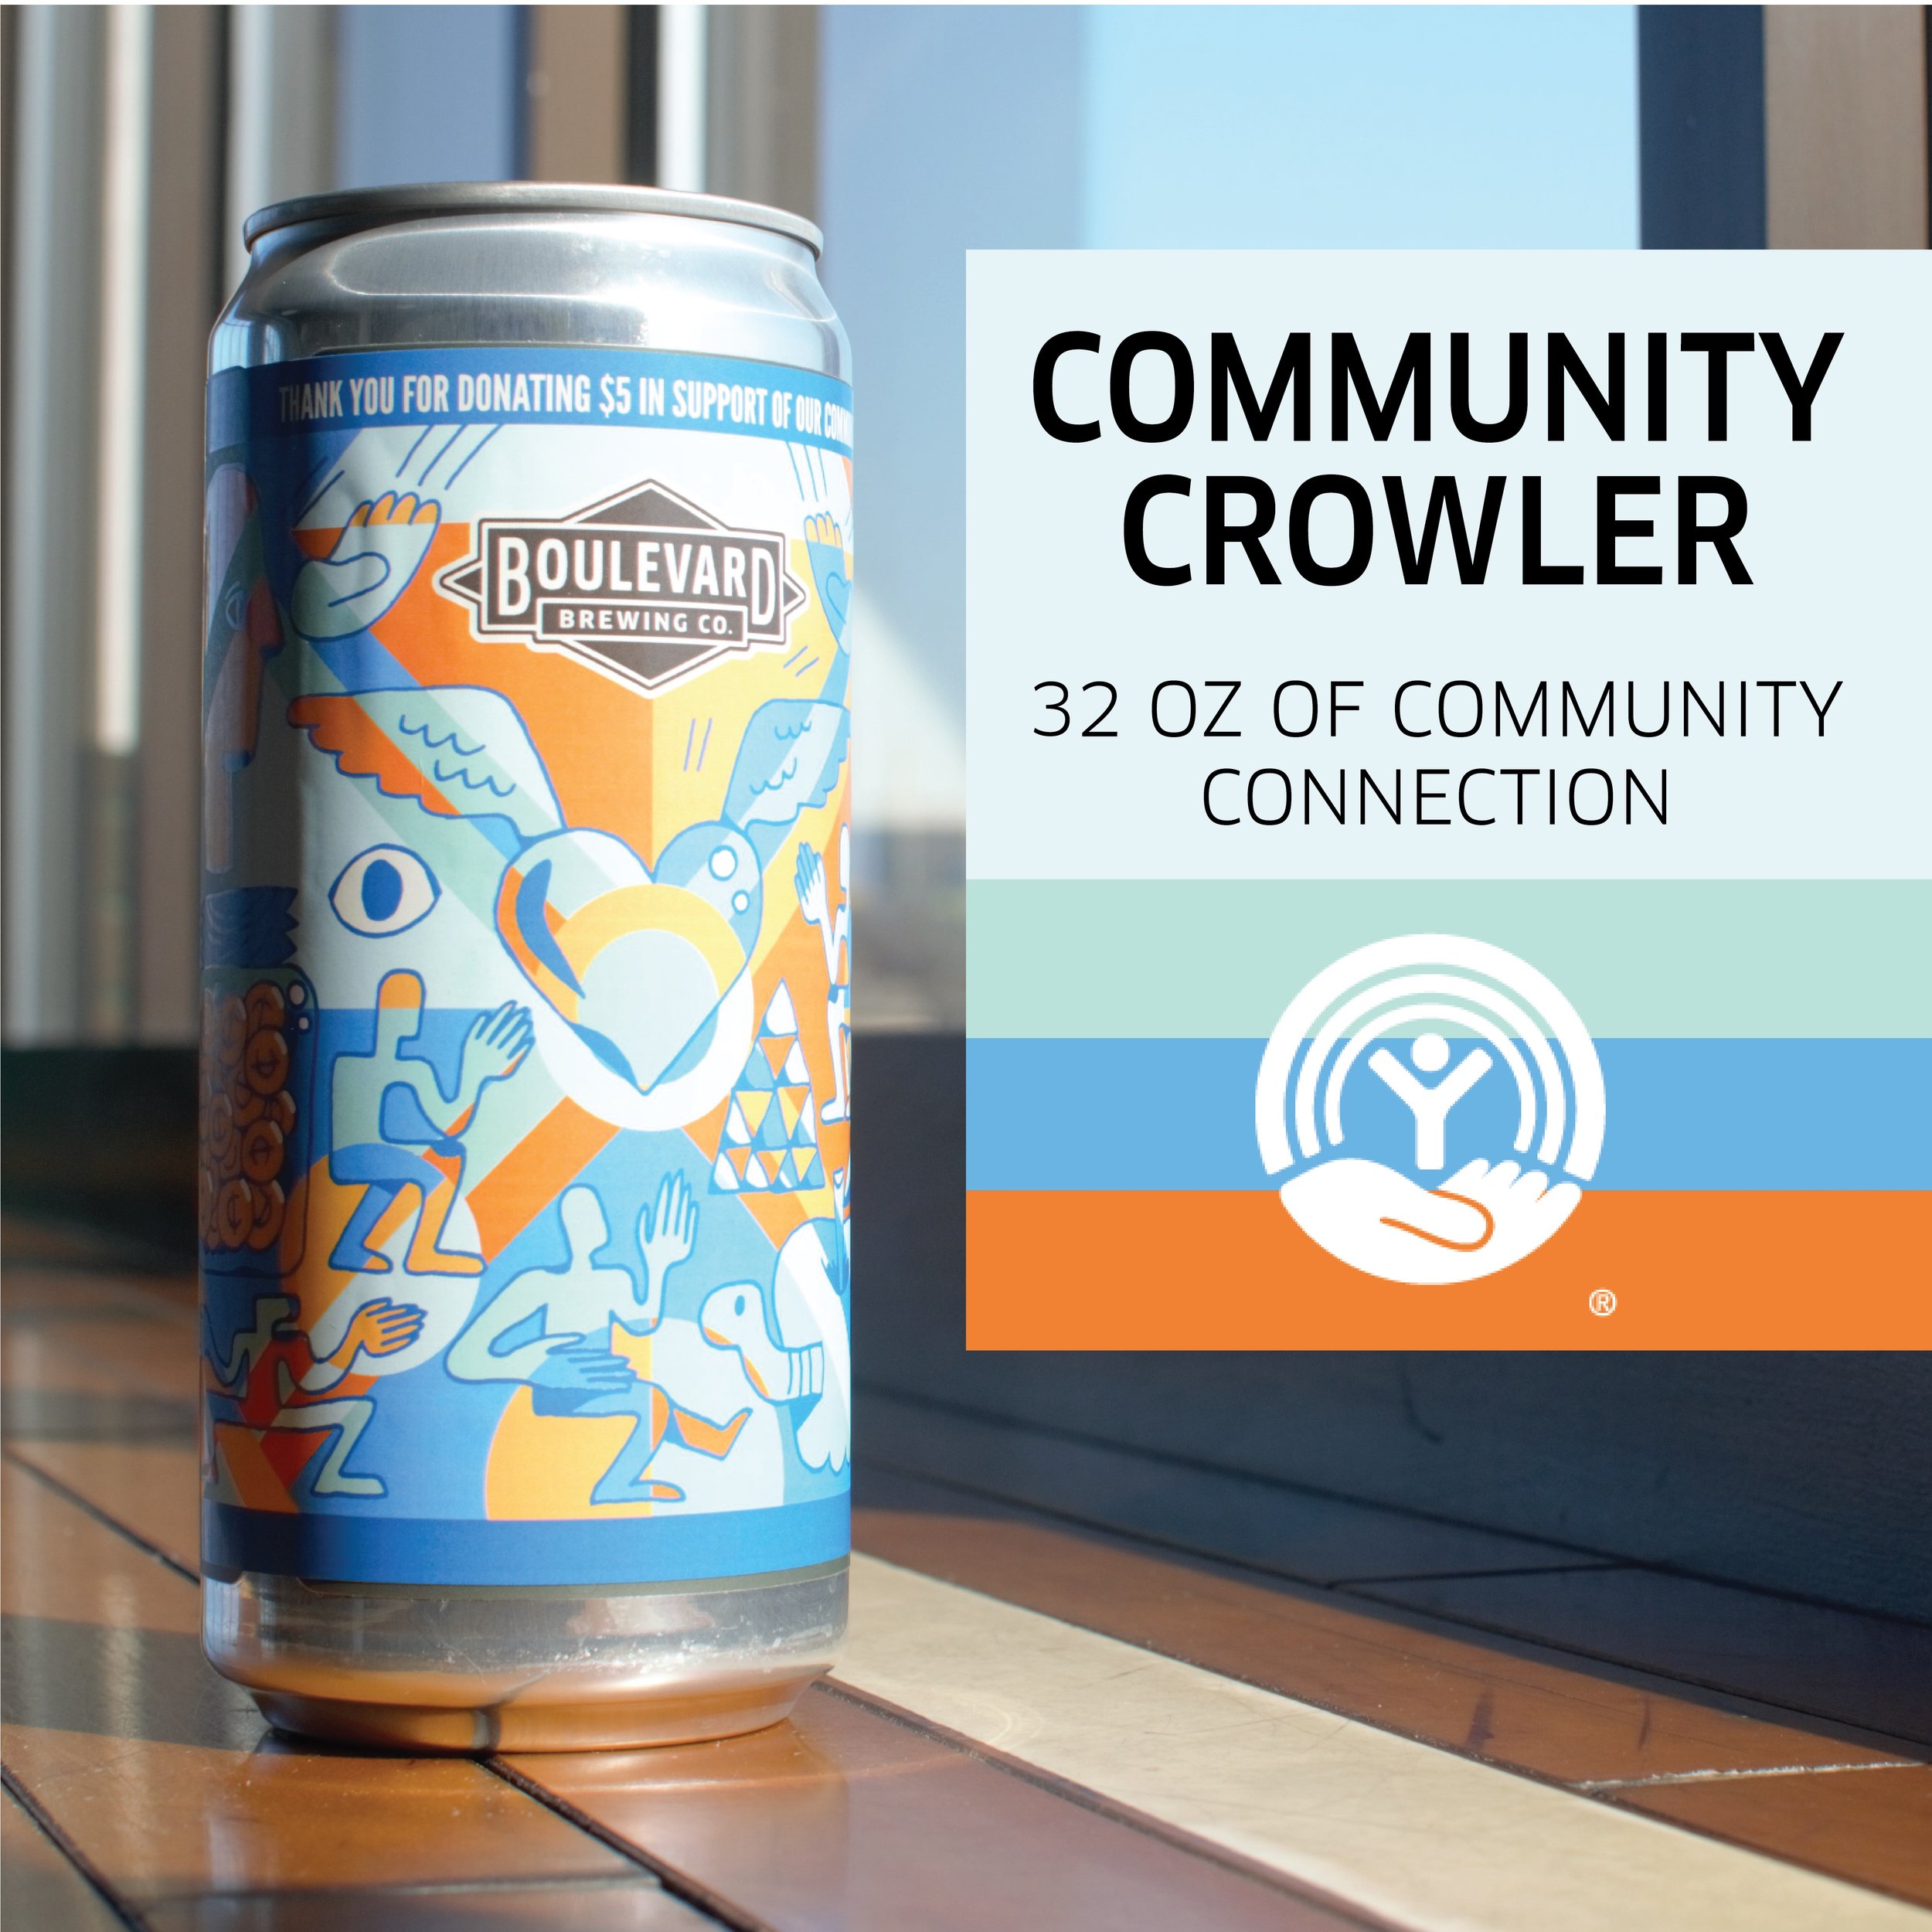 COMMUNITY CROWLERS, BINGO WITH BOULEVARD – United Way of Greater